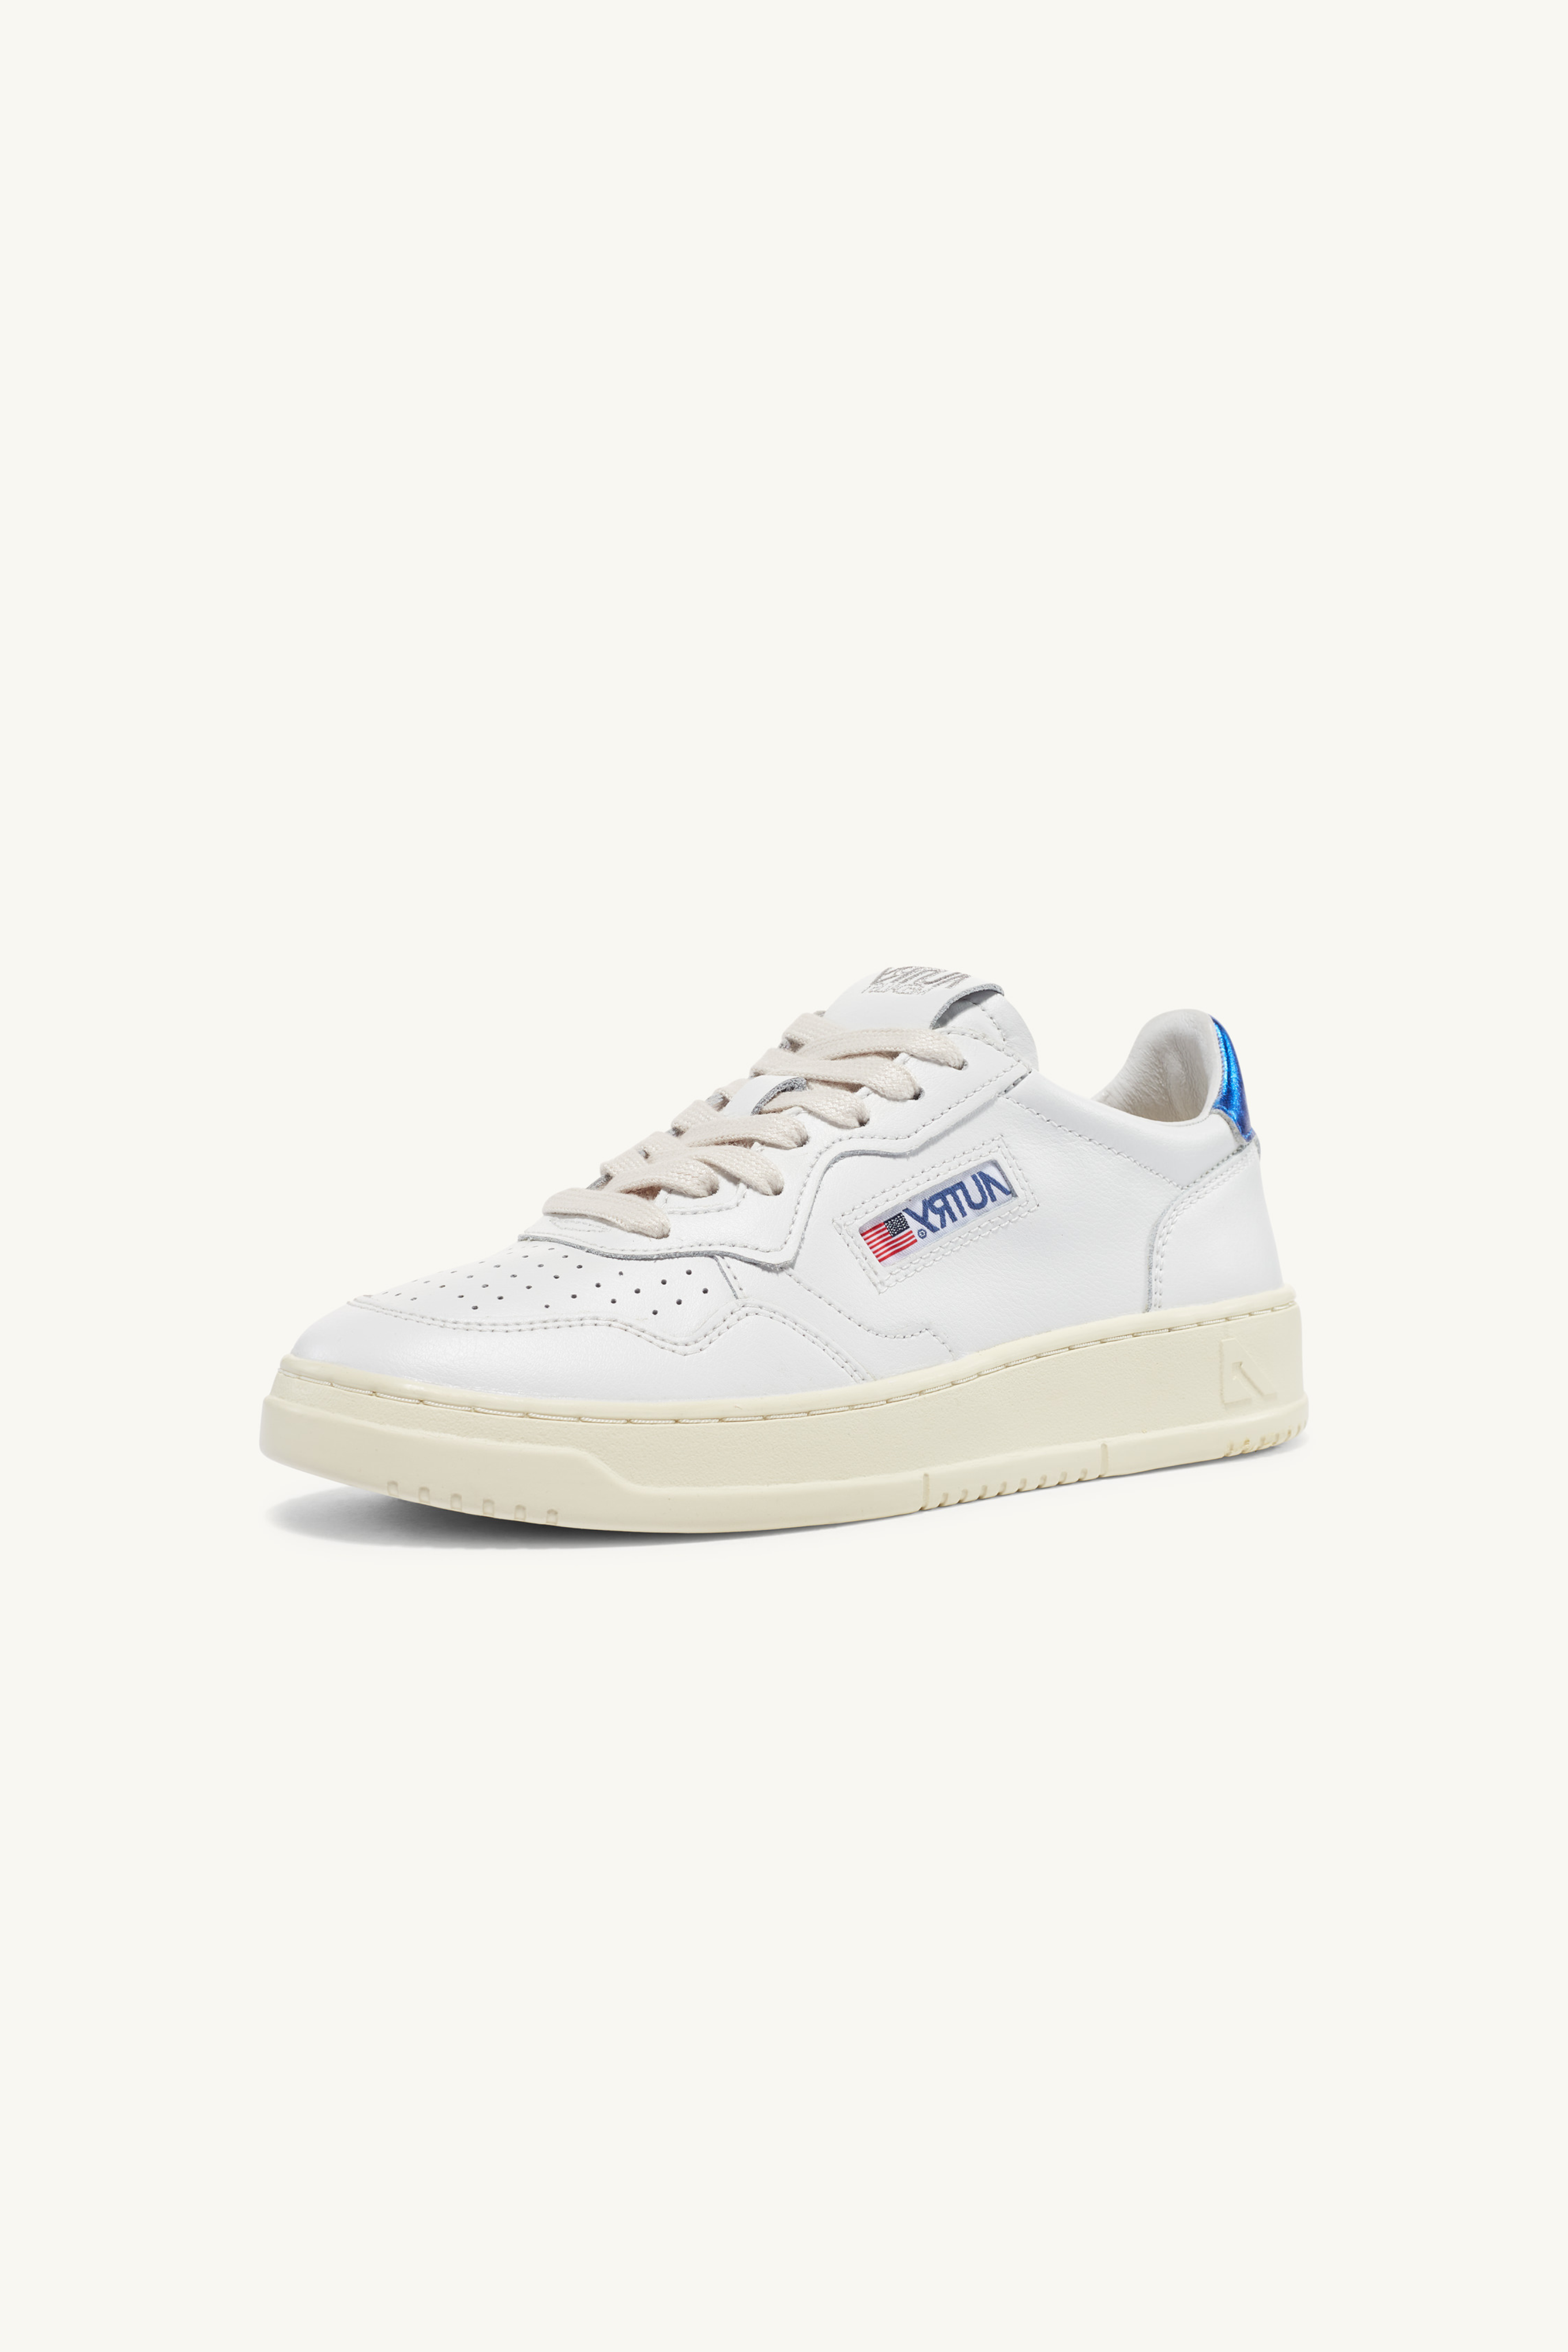 AULW-LL63 - MEDALIST LOW SNEAKERS IN LEATHER WHITE AND BLUE